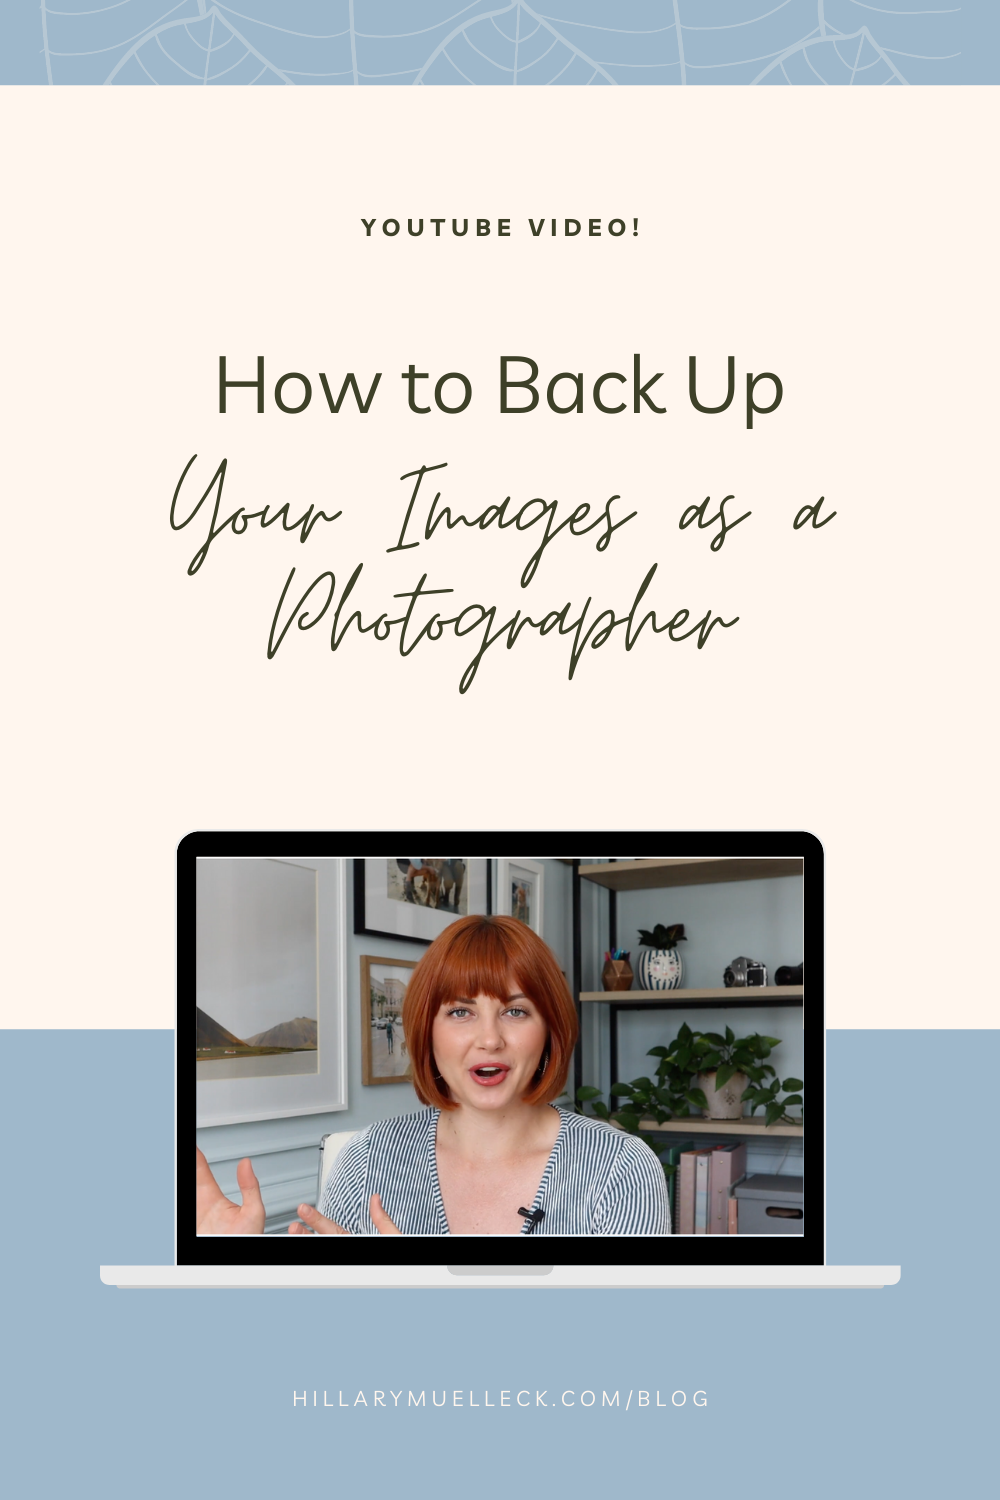 Back Up Systems for Photographers: how to back up your images online and physically as a wedding photographer shared by Hillary Muelleck